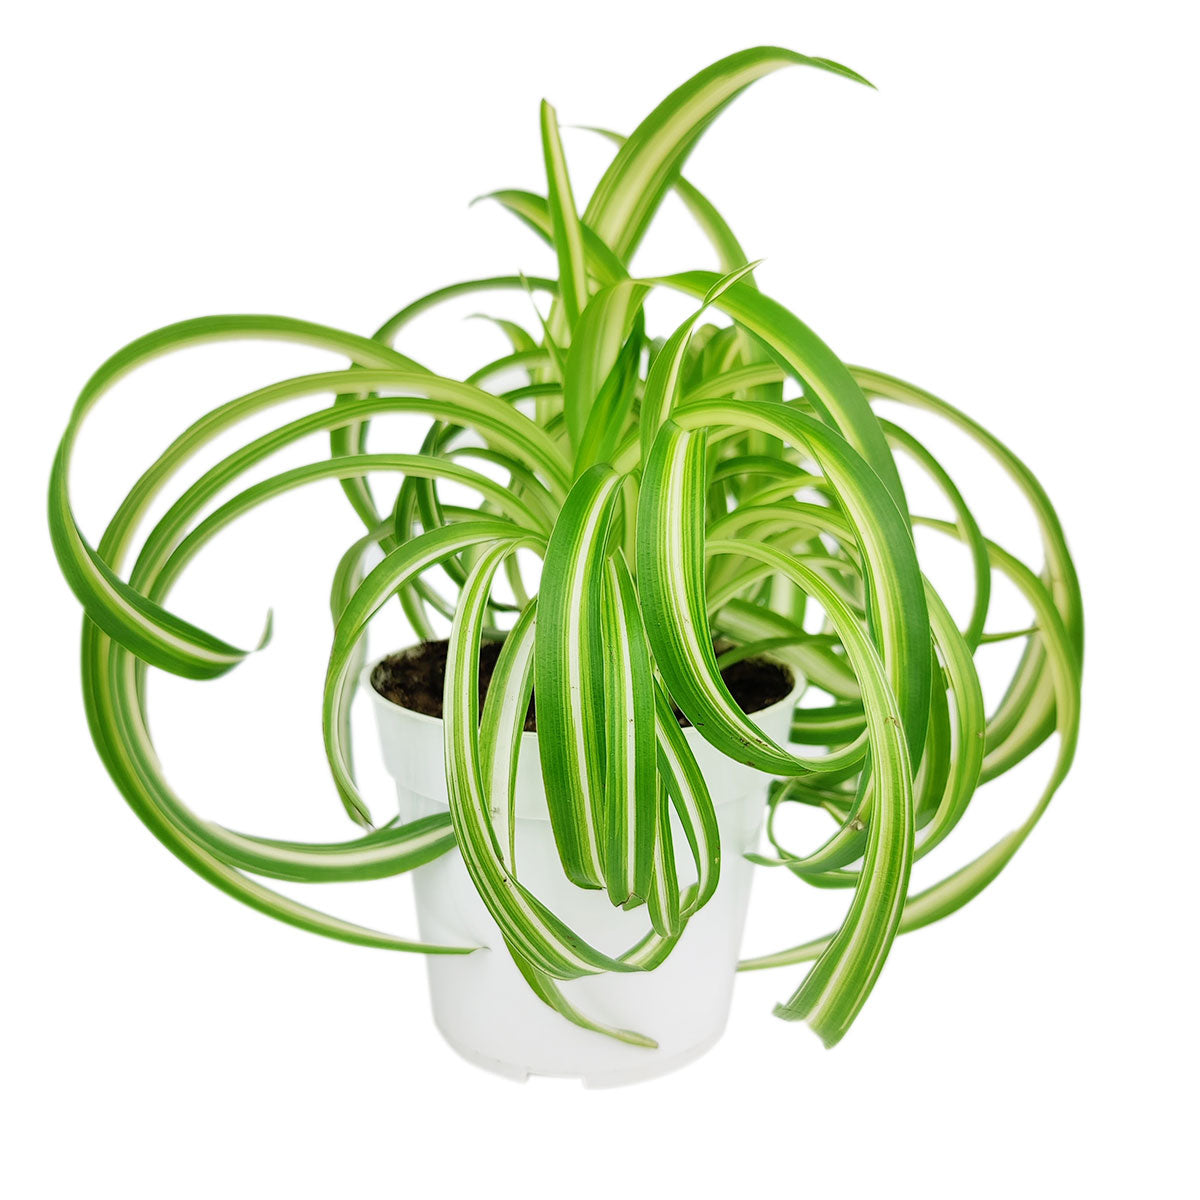  curly spider plant for sale (near me), buy bonnie curly spider plant, chlorophytum comosum, hanging spider plant, spider plant hanging basket, spider plant clean air, spider plant air purifying, best house plant for clean air, curly leaf spider plant, indoor hanging plant, indoor plant hanging ideas - easy care house plant